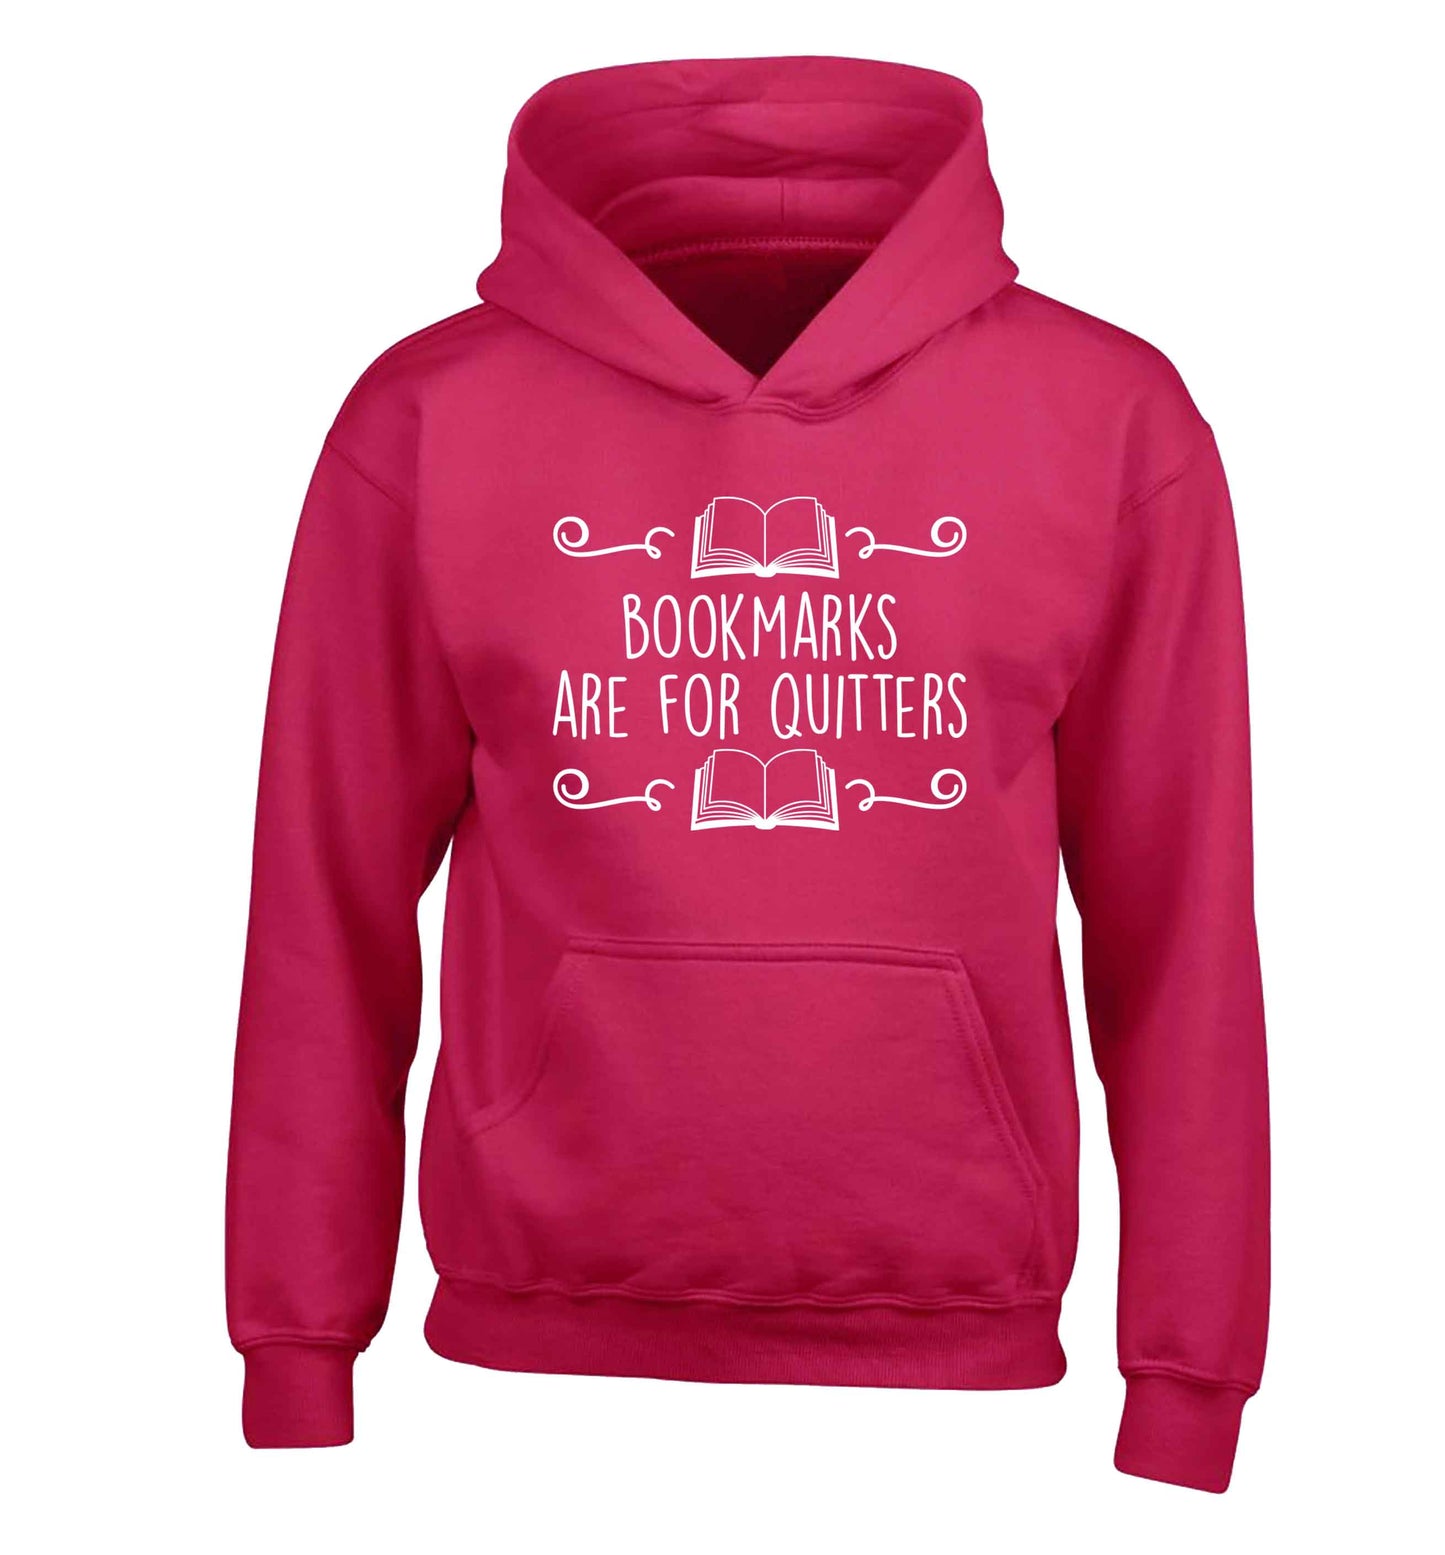 Bookmarks are for quitters children's pink hoodie 12-13 Years